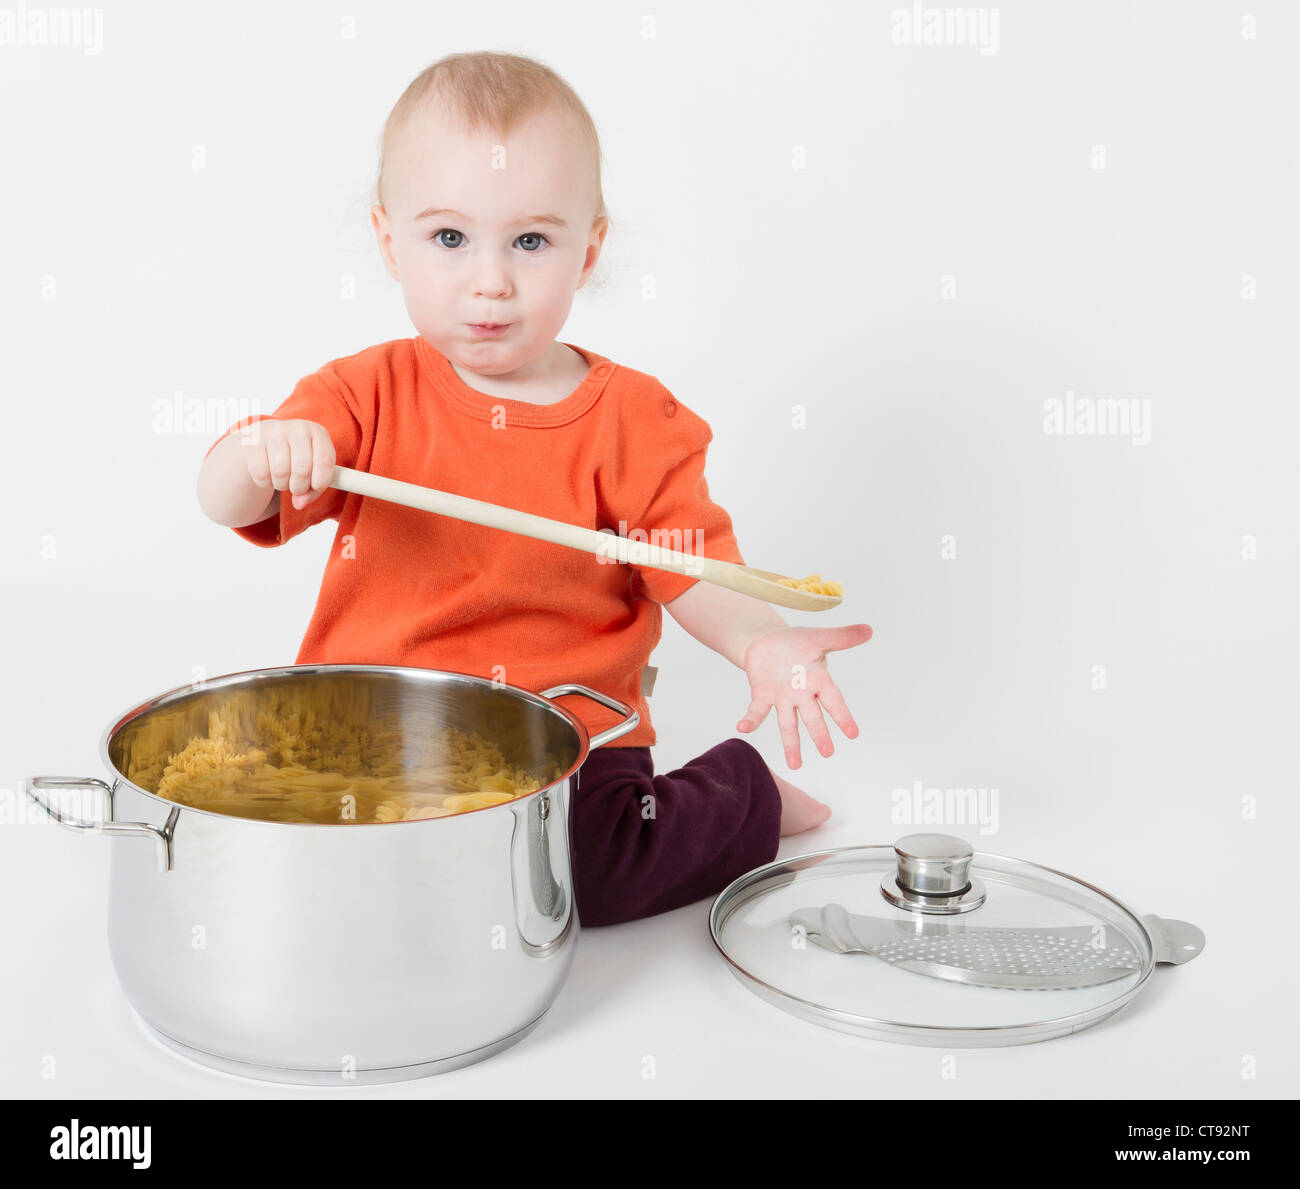 baby with big cooking pot and wooden spoon in neutral grey background Stock Photo